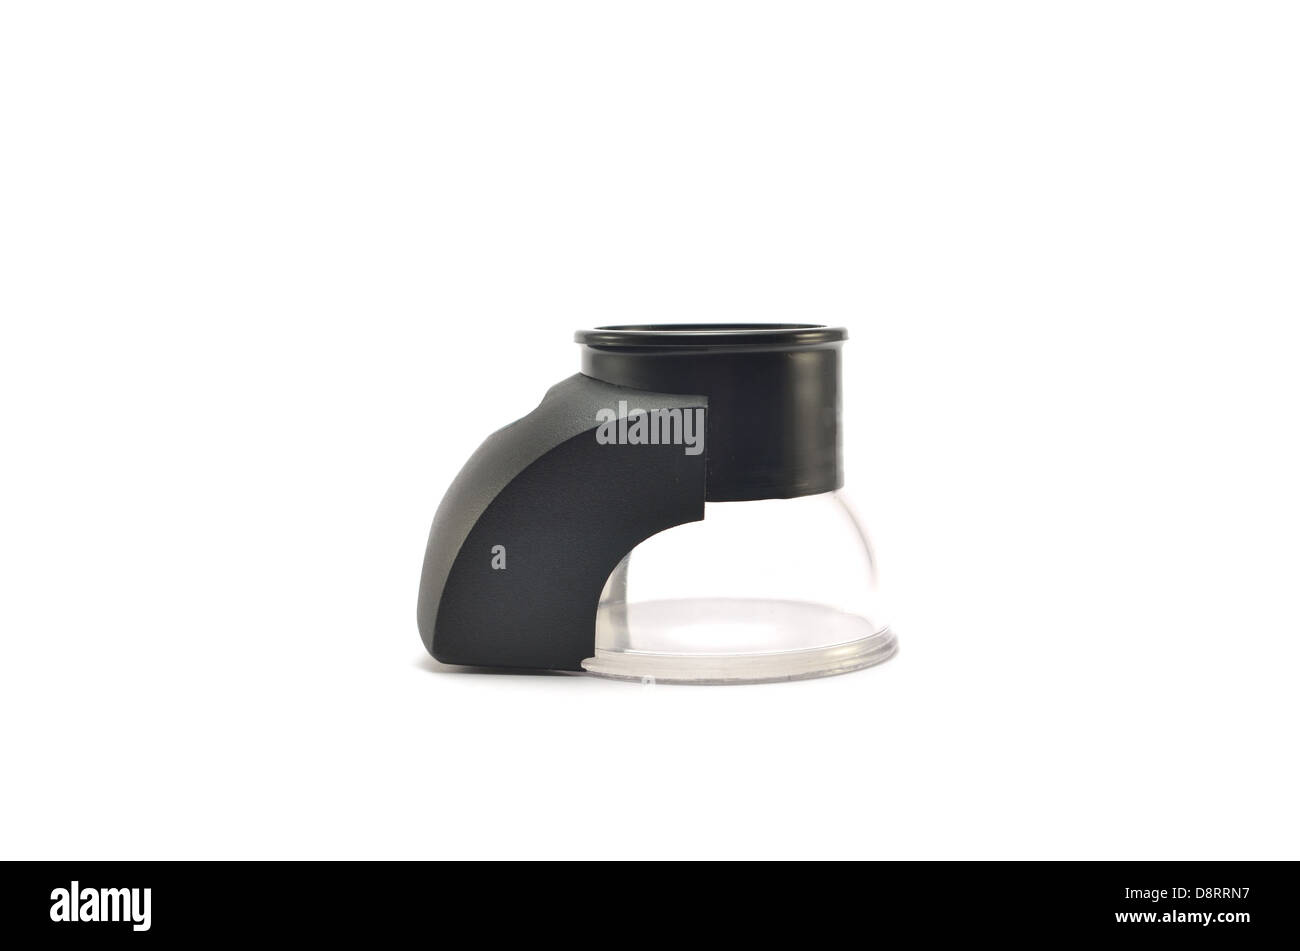 Criminalistic magnifier lies on against white background Stock Photo